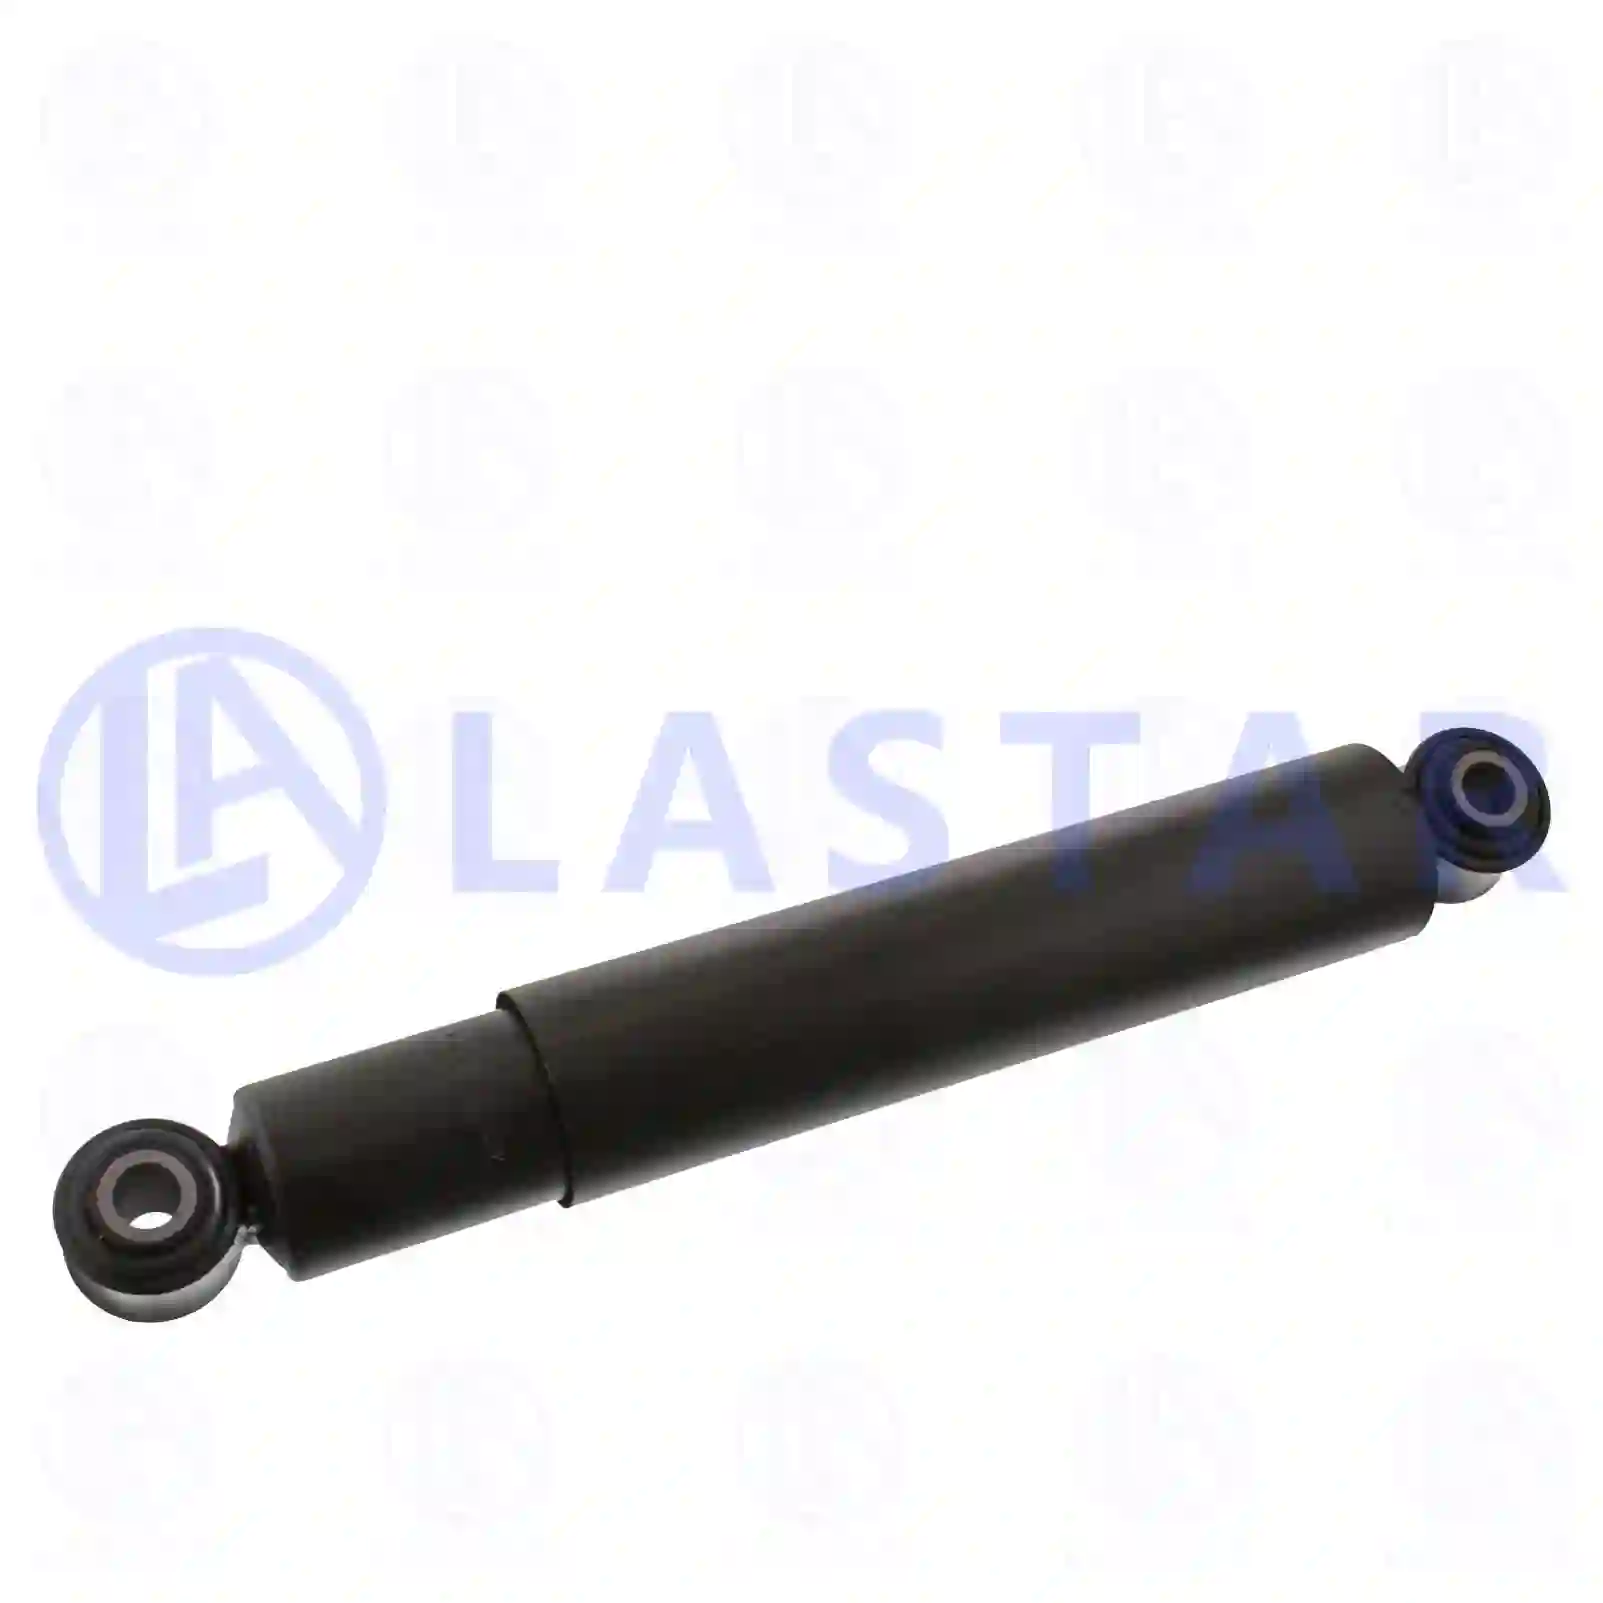 Shock absorber, 77727849, 0053239900, 0063238300, ZG41593-0008, , ||  77727849 Lastar Spare Part | Truck Spare Parts, Auotomotive Spare Parts Shock absorber, 77727849, 0053239900, 0063238300, ZG41593-0008, , ||  77727849 Lastar Spare Part | Truck Spare Parts, Auotomotive Spare Parts